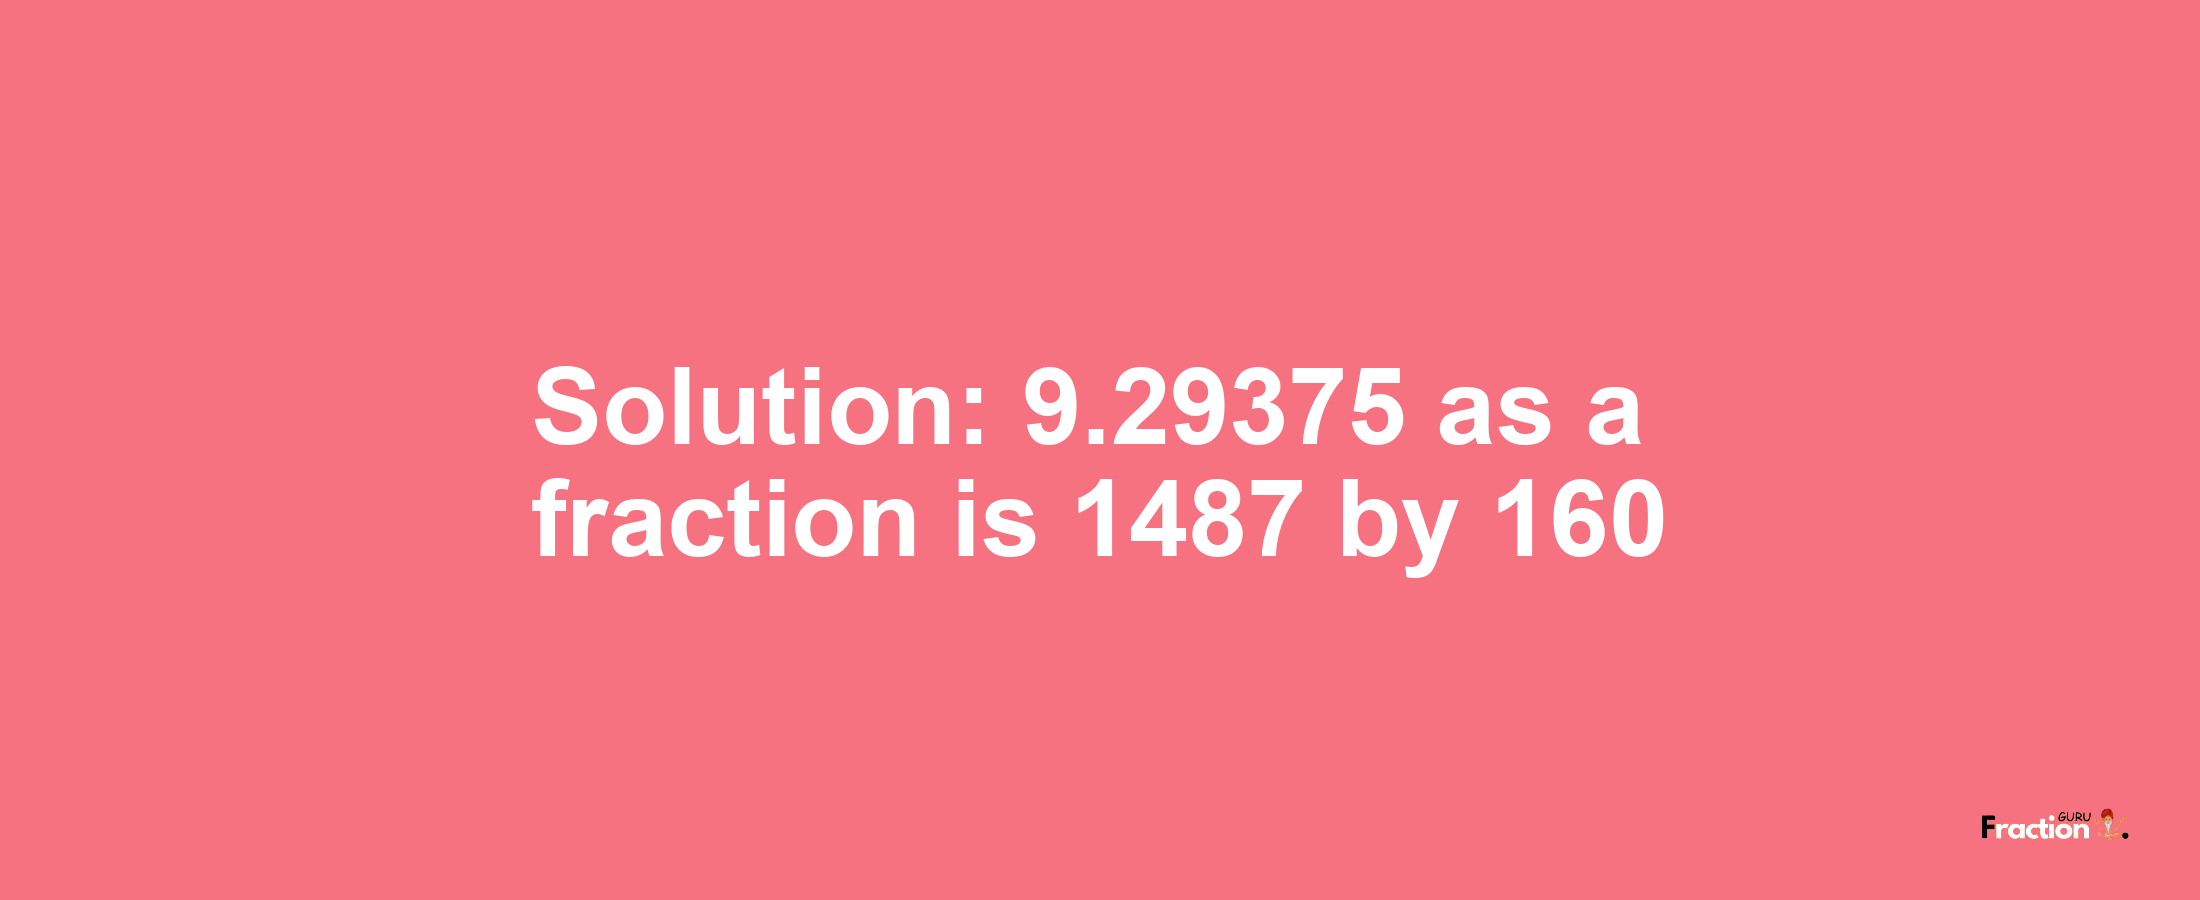 Solution:9.29375 as a fraction is 1487/160